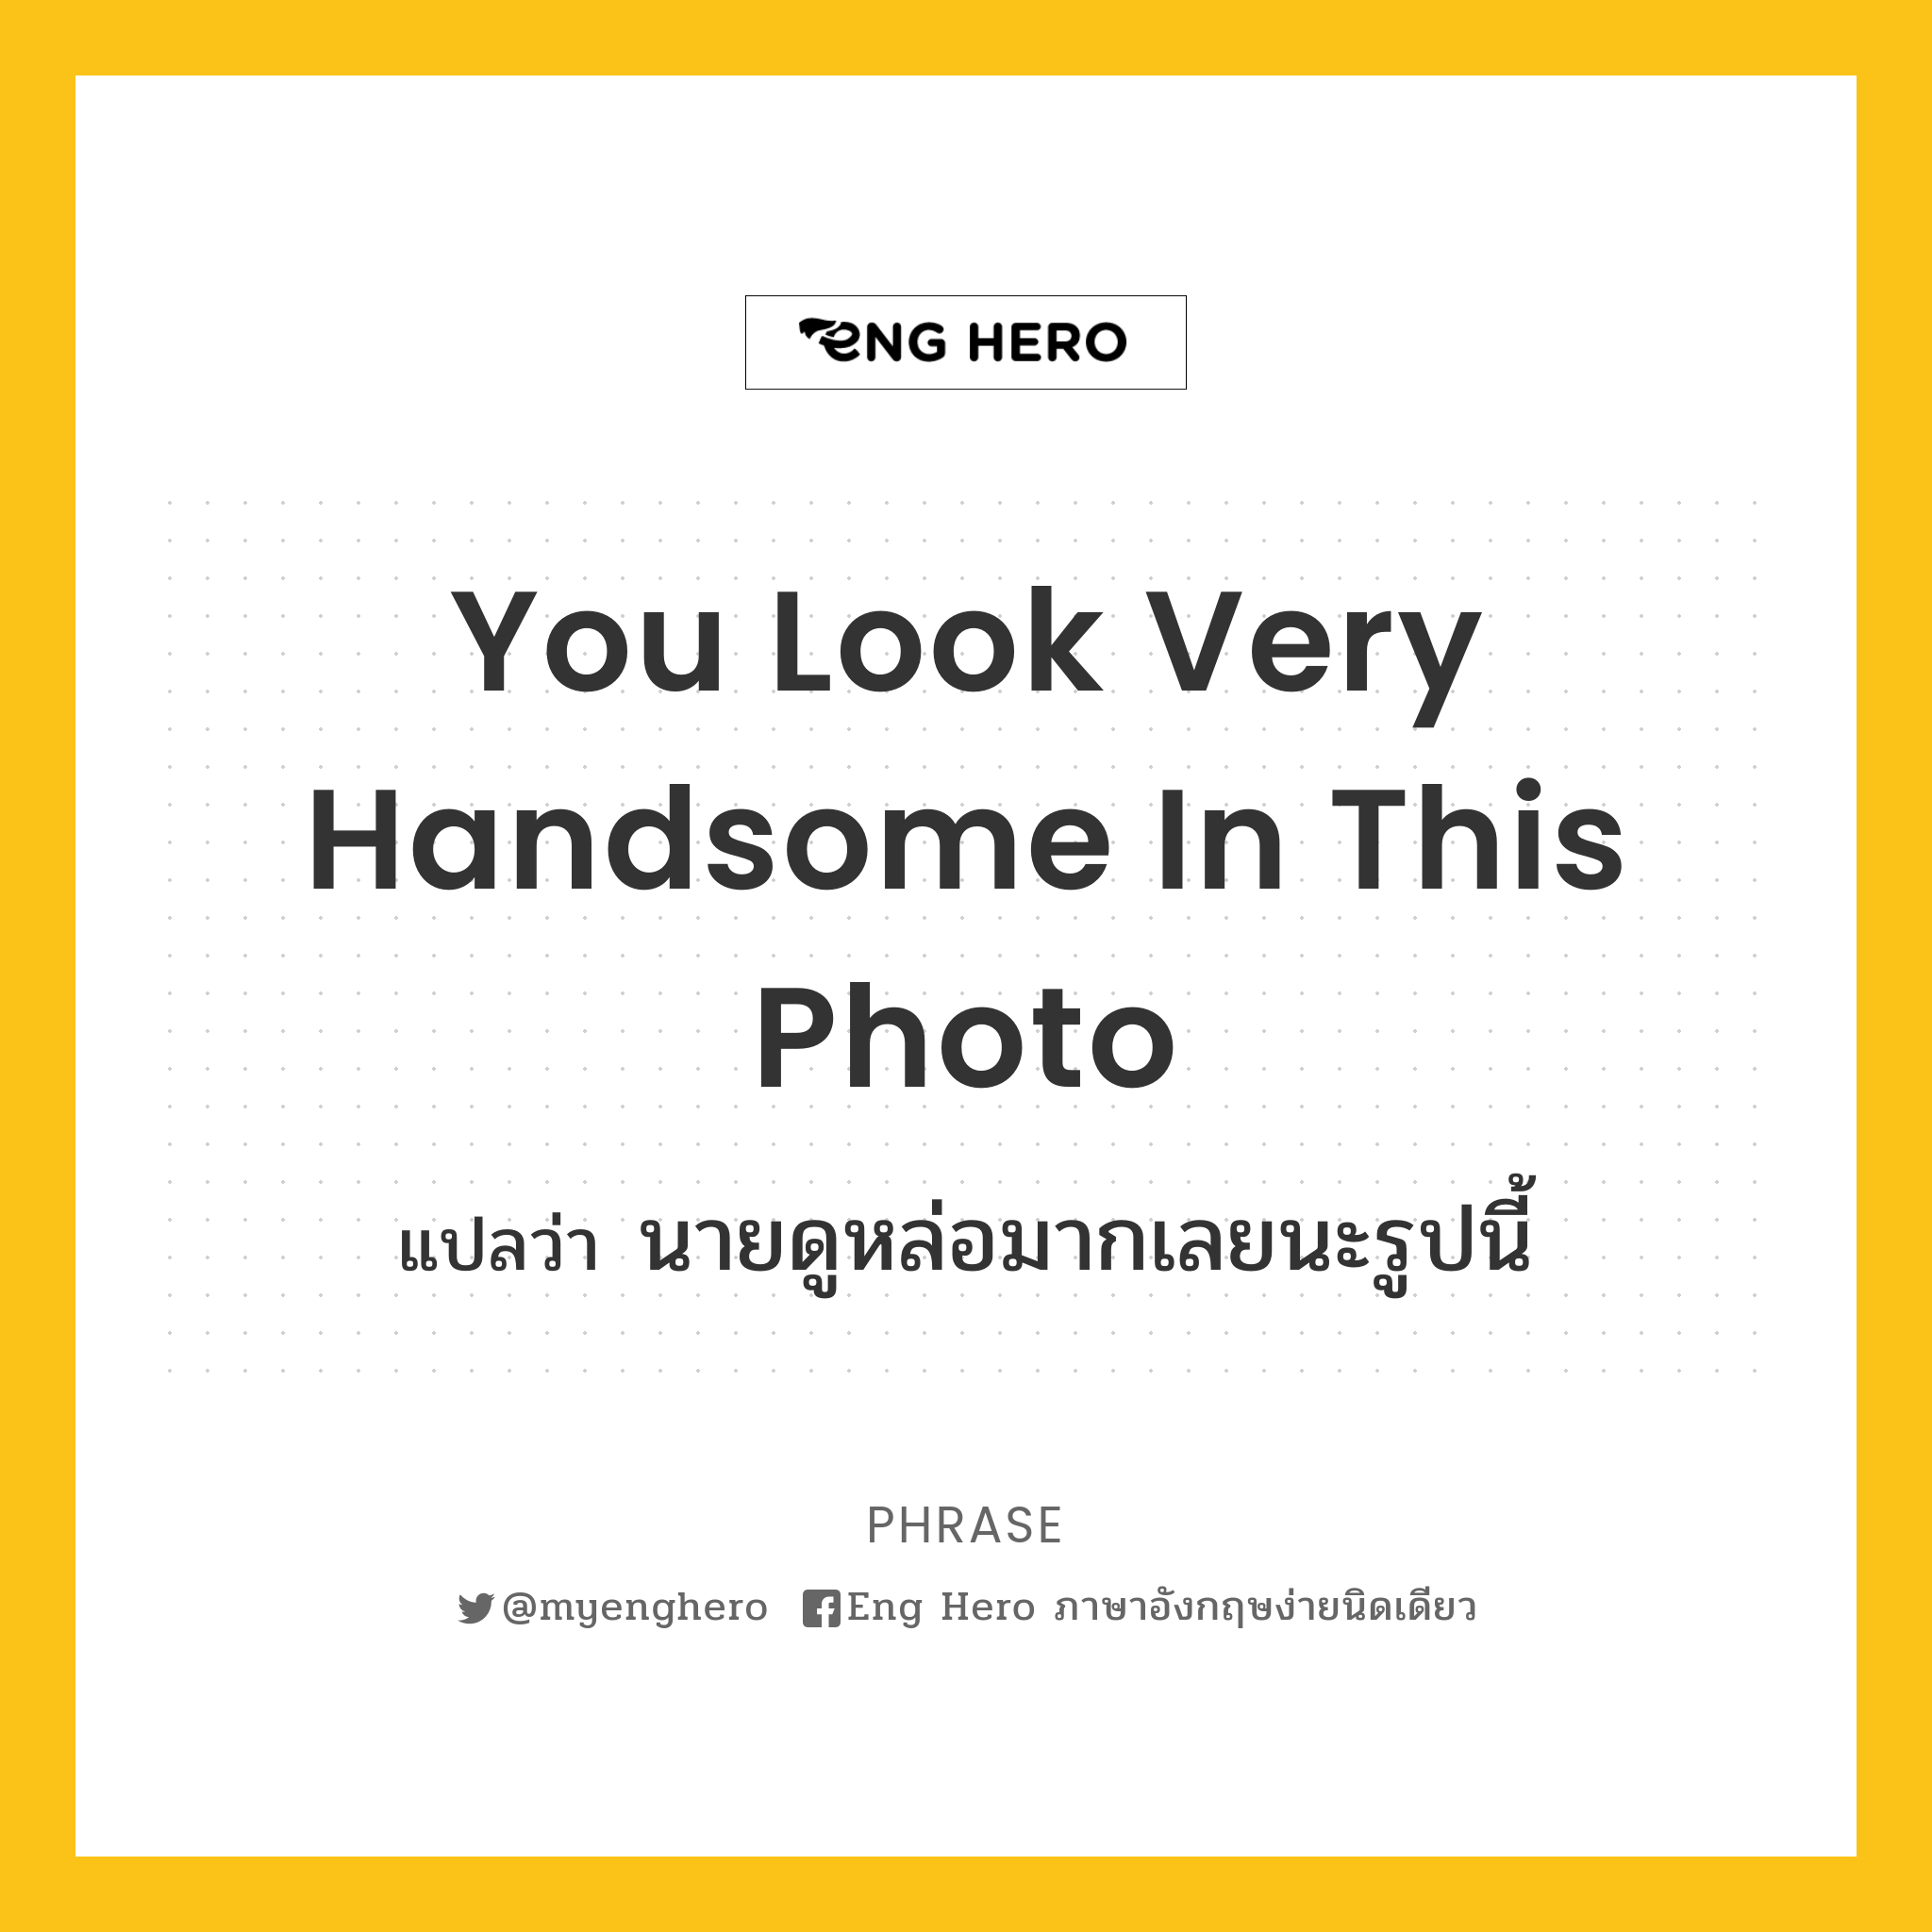 You look very handsome in this photo